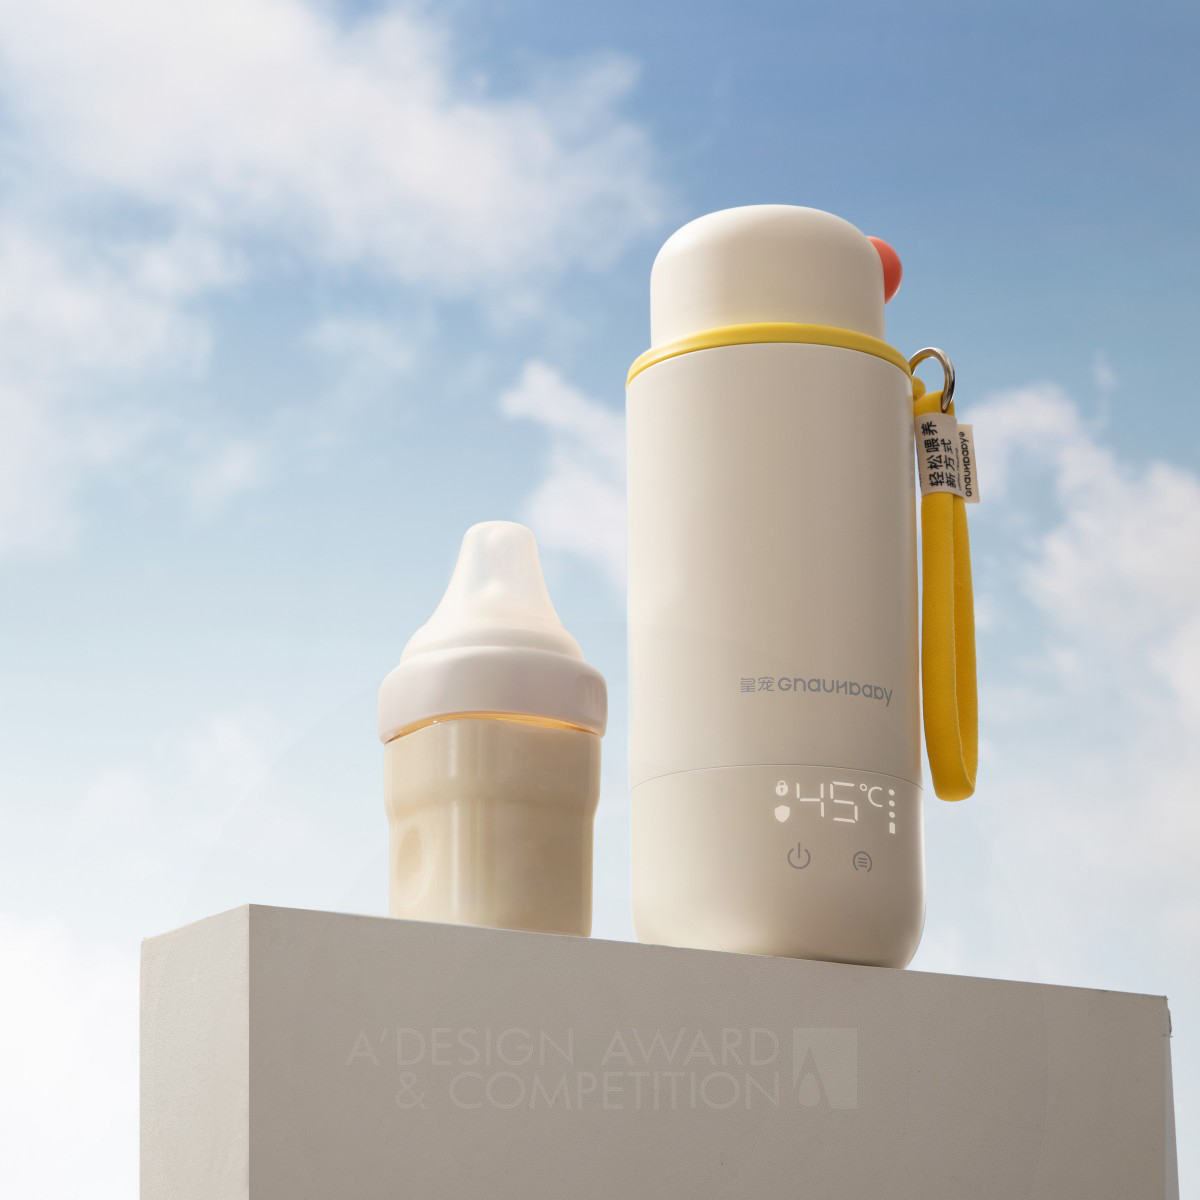 Hangzhou YaobaoInfant Products Co., Ltd wins Silver at the prestigious A' Baby, Kids and Children's Products Design Award with Smart Temp Guardian Bottle.